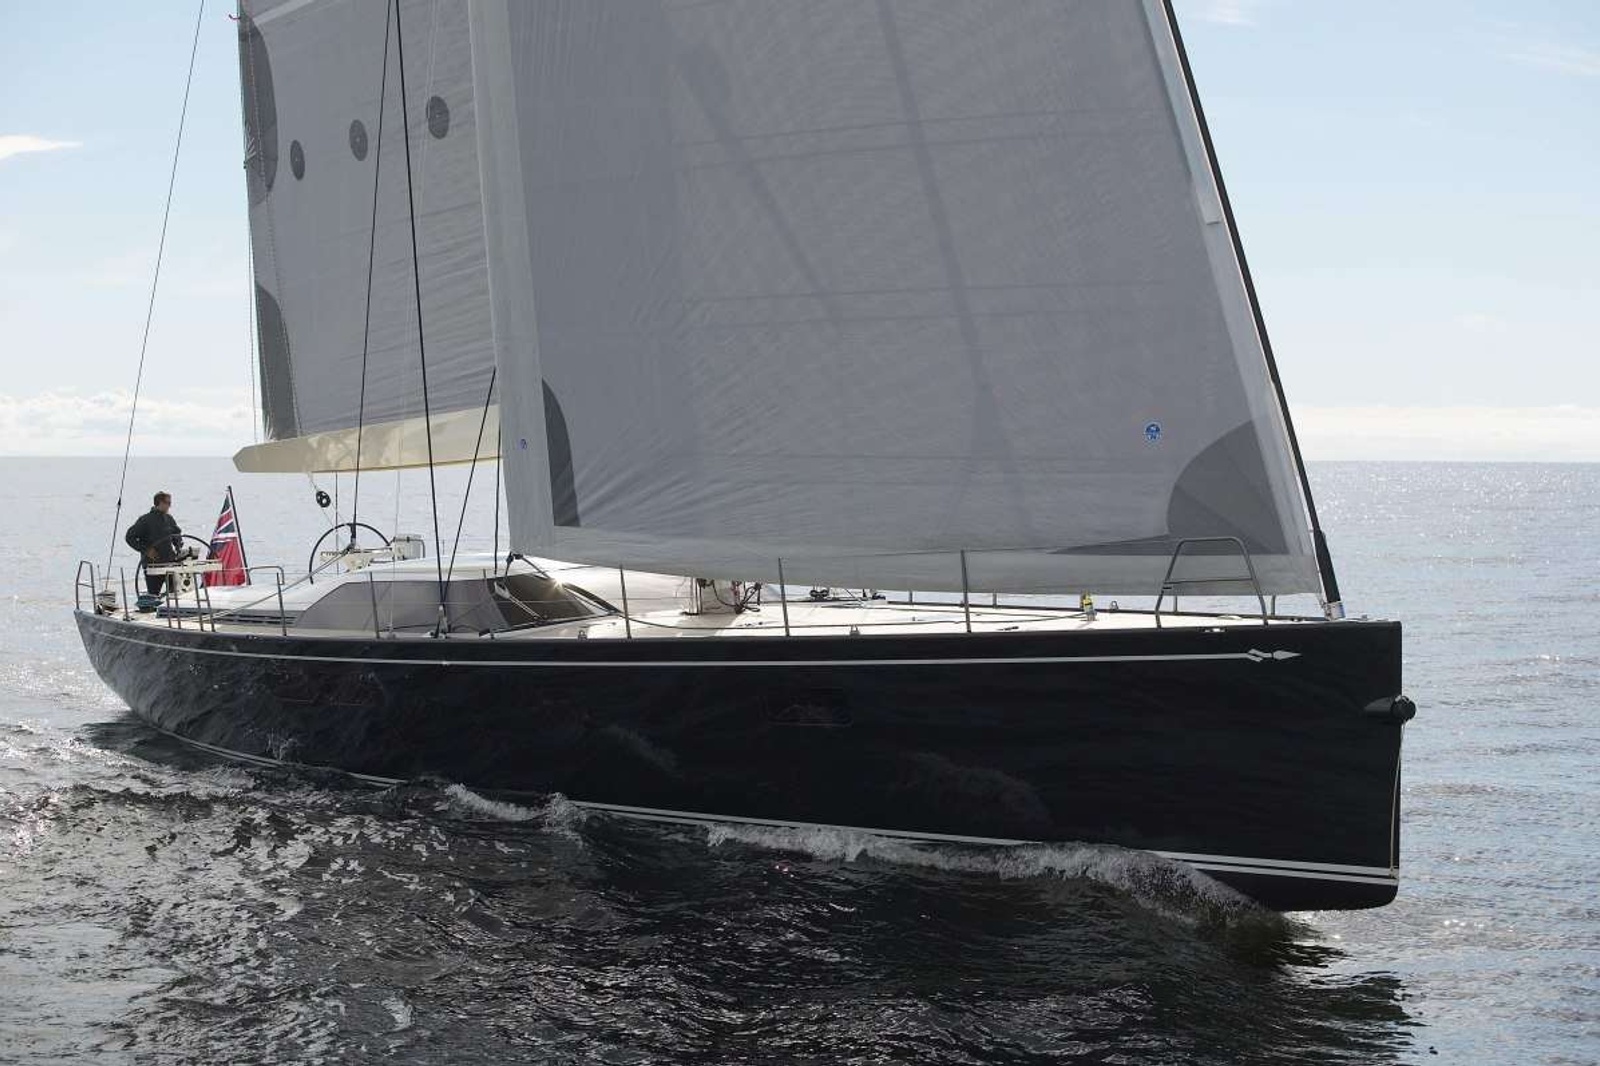 Built with precision and craftsmanship by Baltic Yachts in 2008, with a refit in 2021, this exhilarating yacht was designed by renown naval architect Bill Tripp. BLACK PEARL II is fast and responsive and sails with agility and dynamism. The lifting keel feature allows for maneuvrering and anchoring in shallow waters. A dedicated and experienced crew of 3 will ensure a memorable stay onboard.

BLACK PEARL II's interior by Rhoades Young boasts a luminous, tranquil atmosphere – perfect for six guests. 
The inviting contemporary design features blonde wood and a flood of natural light. The layout includes 3 ensuite cabins with a full beam master stateroom, a double VIP cabin, and 1 bunk bed cabin. There is also a study/office with sofa located on the starboard side. 

KEY FEATURES:

Lifting-keel performance sloop designed by Bill Tripp for an exhilarating sailing experience.
High-grade materials and infusion-type laminating processes ensure strength and performance.
Interior by Rhoades Young creates a light, airy atmosphere.
Accommodates 6 guests in 3 cabins with flexible arrangements.
Master, VIP, and guest cabins with en-suite facilities.
Dedicated mid and forward sections minimize noise when moored stern-to.
Yanmar engines for cruising at 8 knots, max speed of 11 knots, and a range of 800 nautical miles at 10 knots.
Air conditioning ensures comfort throughout the charter.
Water toys include waterskis, wakeboards, scuba diving, and snorkelling equipment.
4.66m/15'3